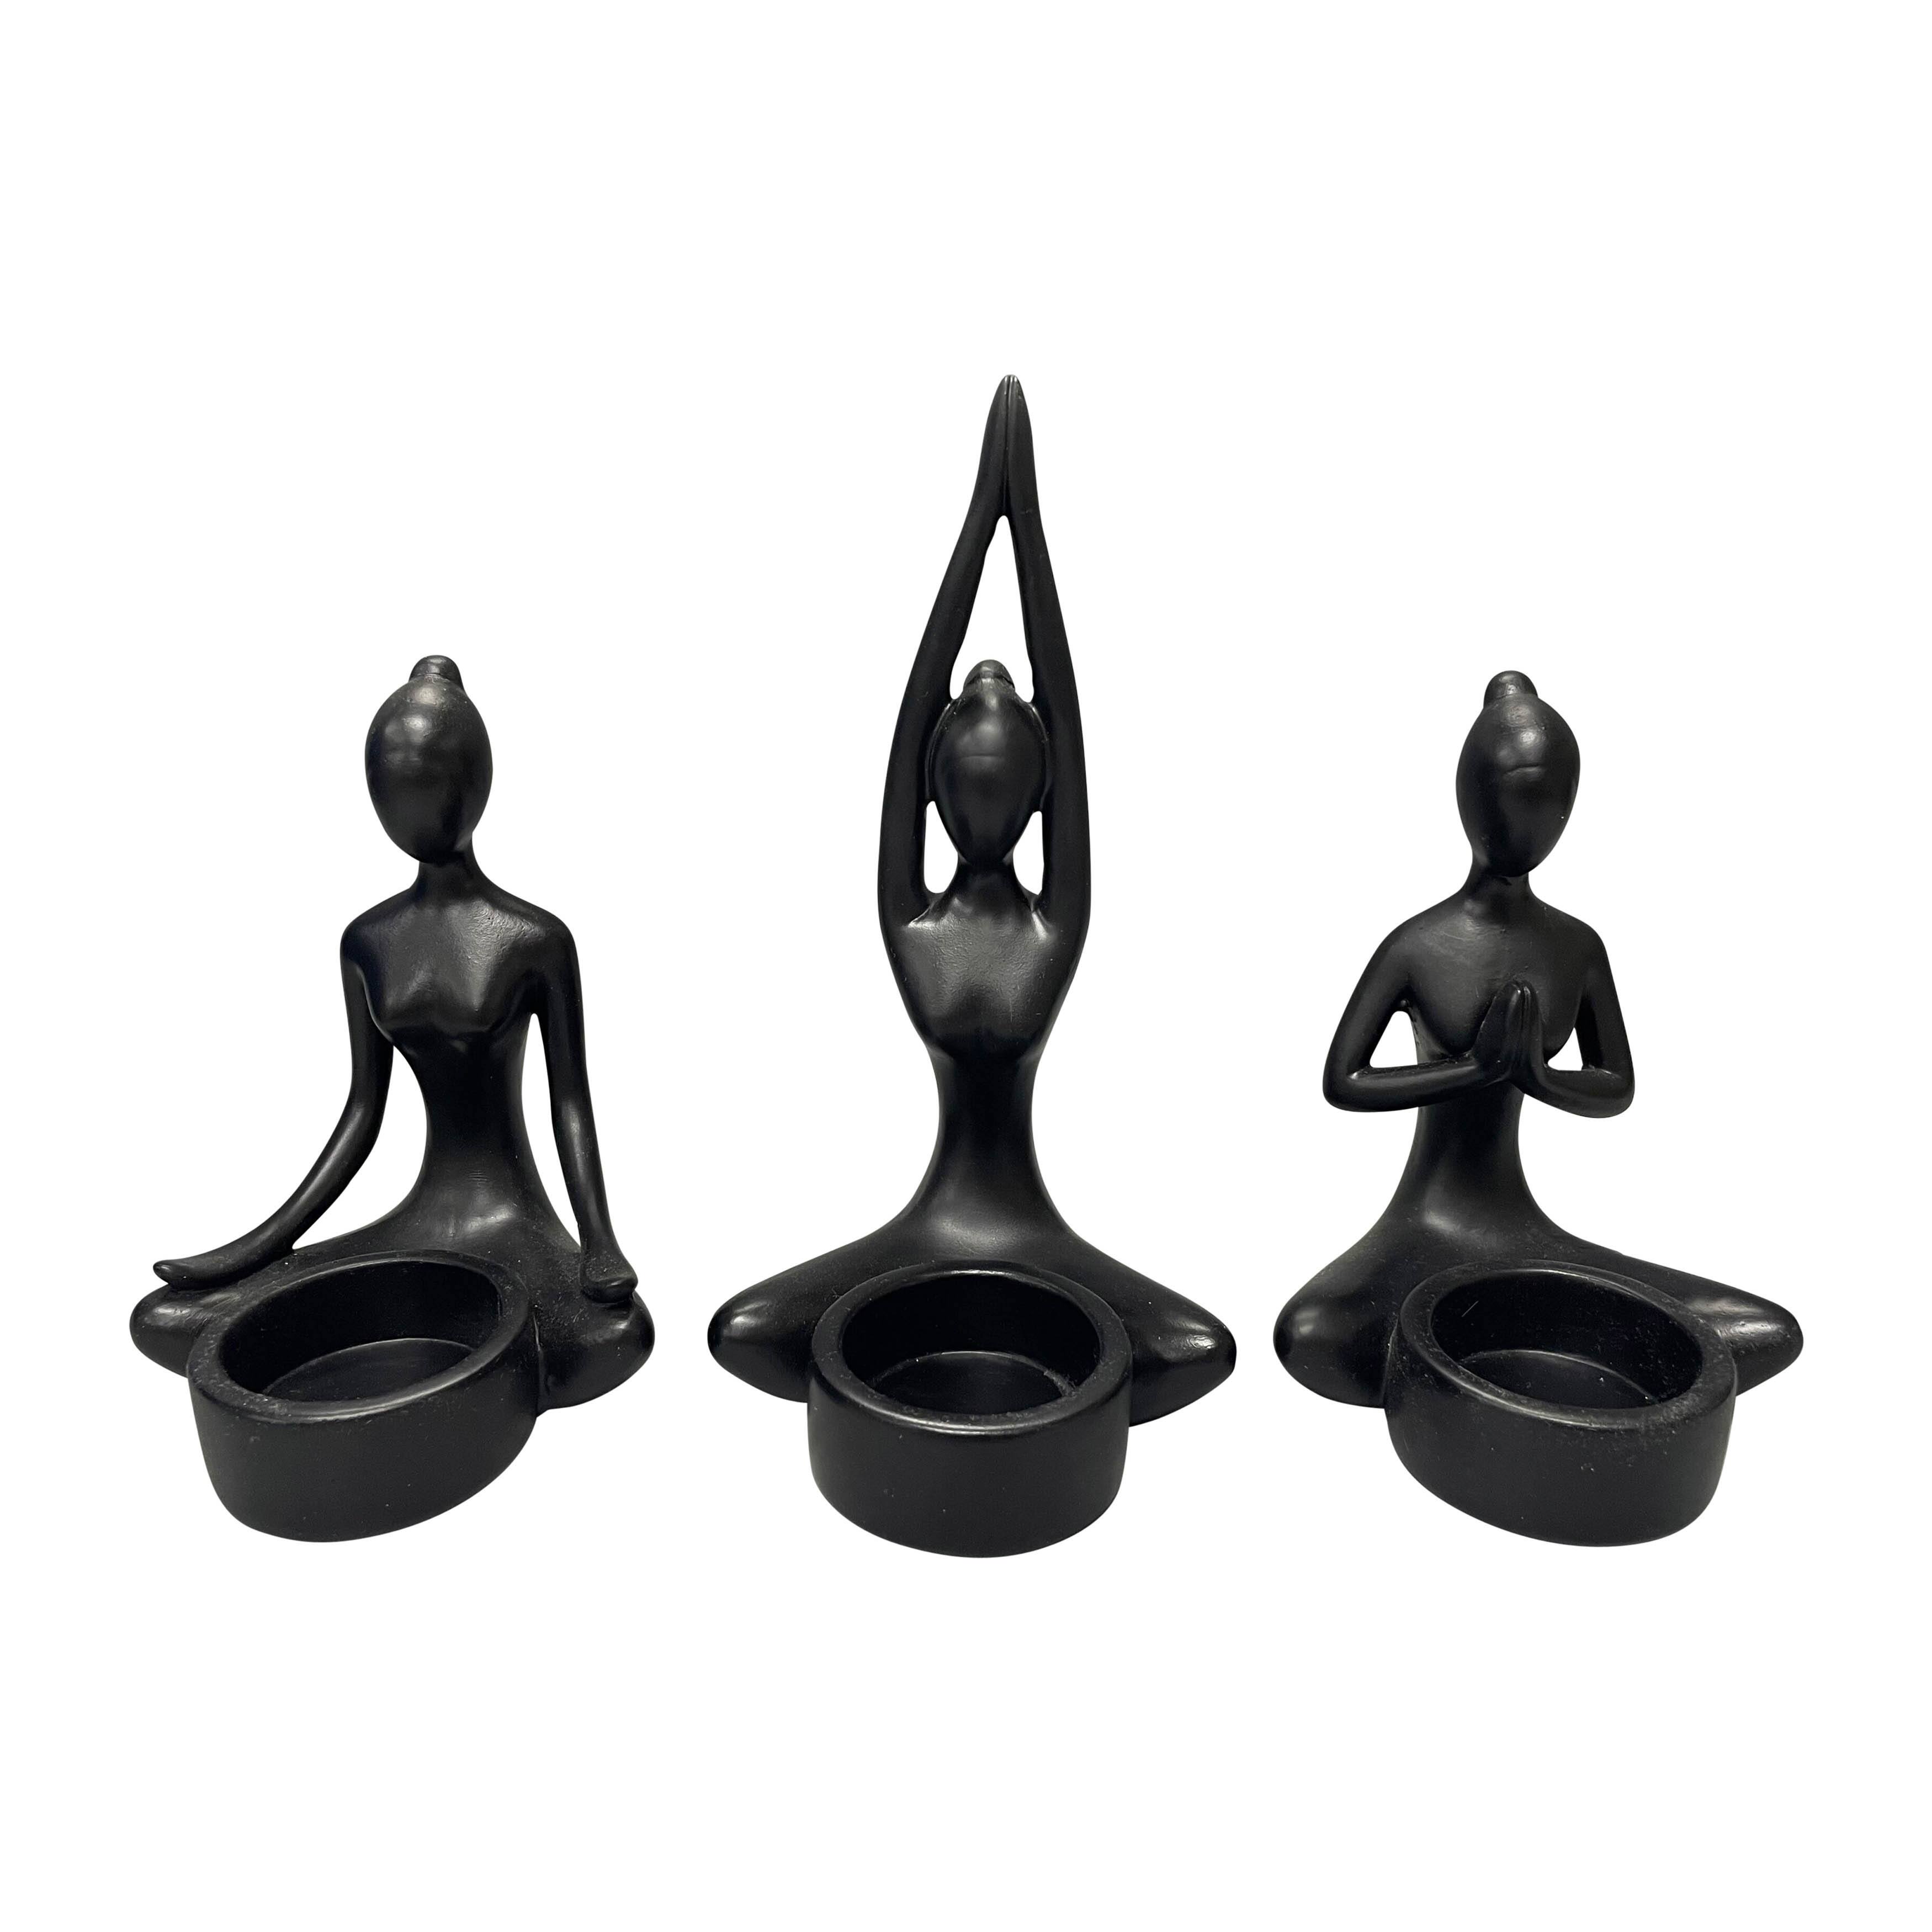 7" Set of 3 Yoga Candle Holder Polyresin Black Seated Women Votive Candle Holder Peaceful Candle Decor for Home, - 3" x 3" x 6"